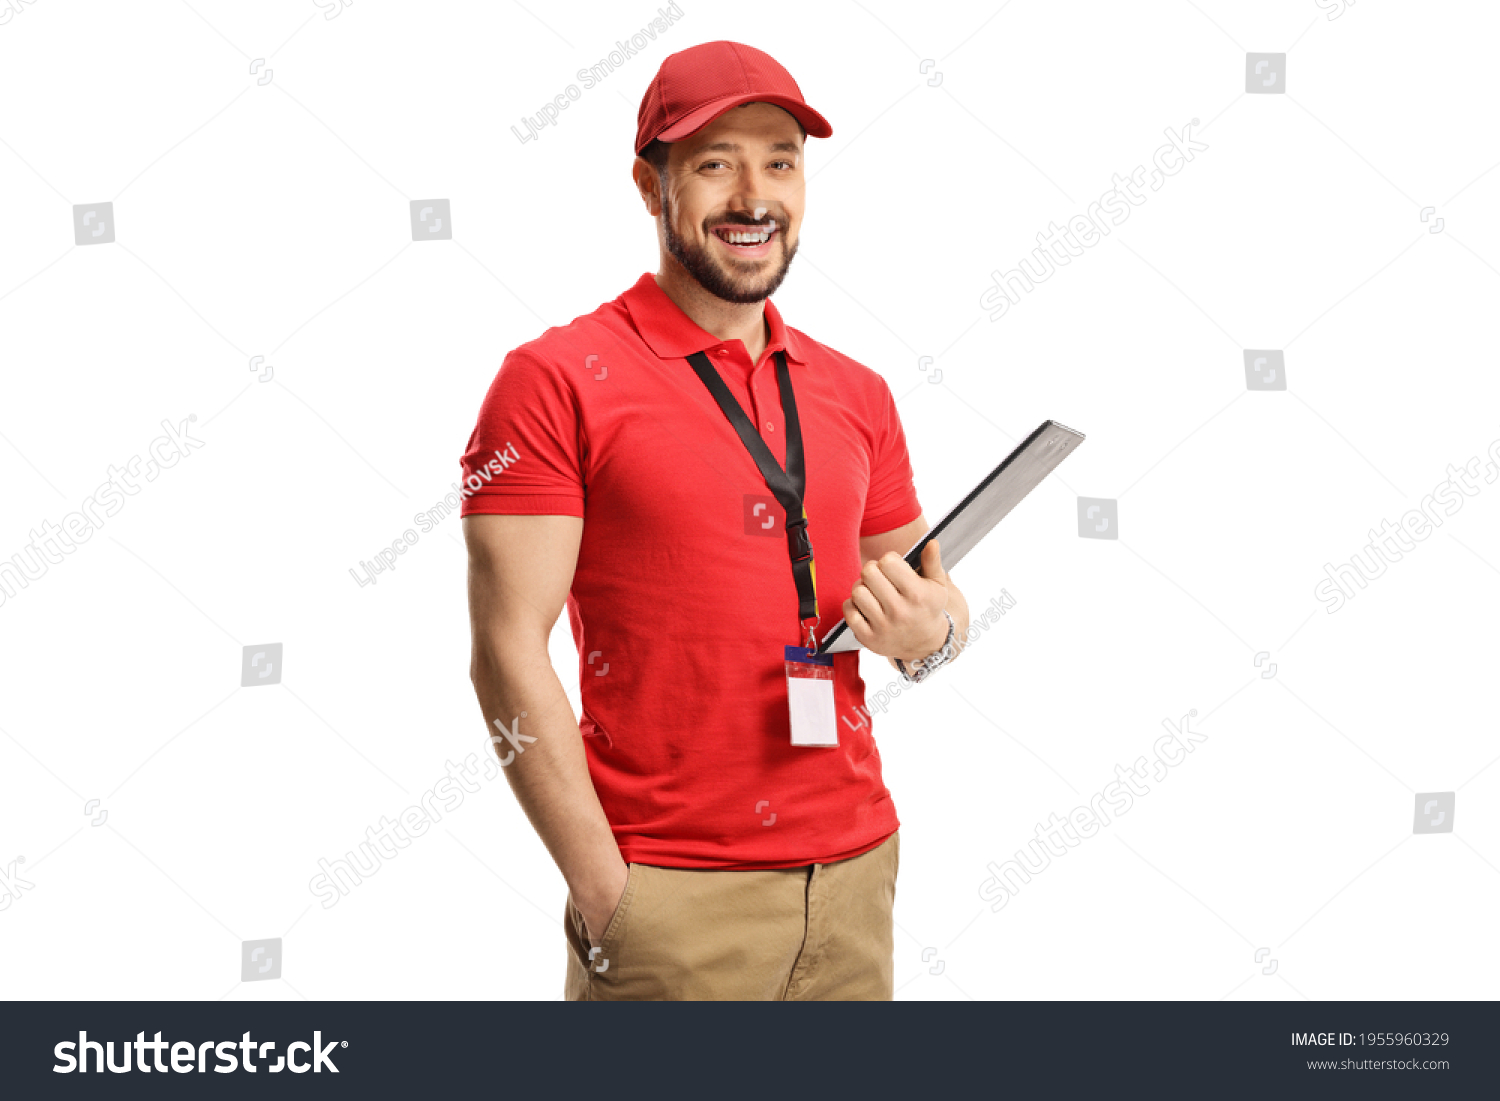 Sales clerk smiling at camera isolated on white background #1955960329